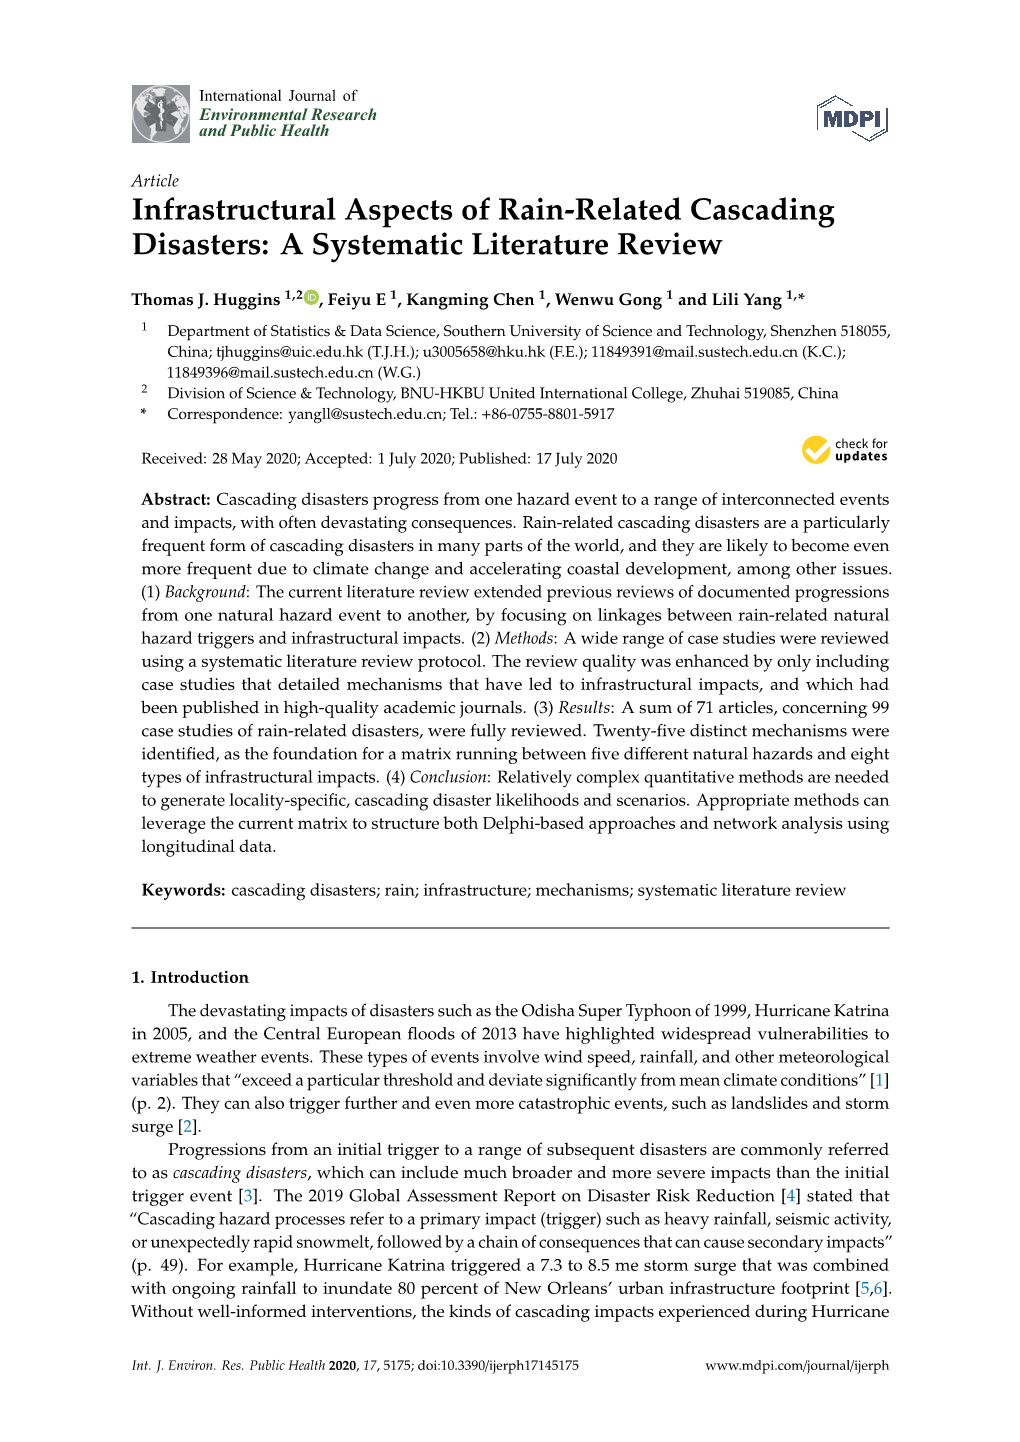 Infrastructural Aspects of Rain-Related Cascading Disasters: a Systematic Literature Review